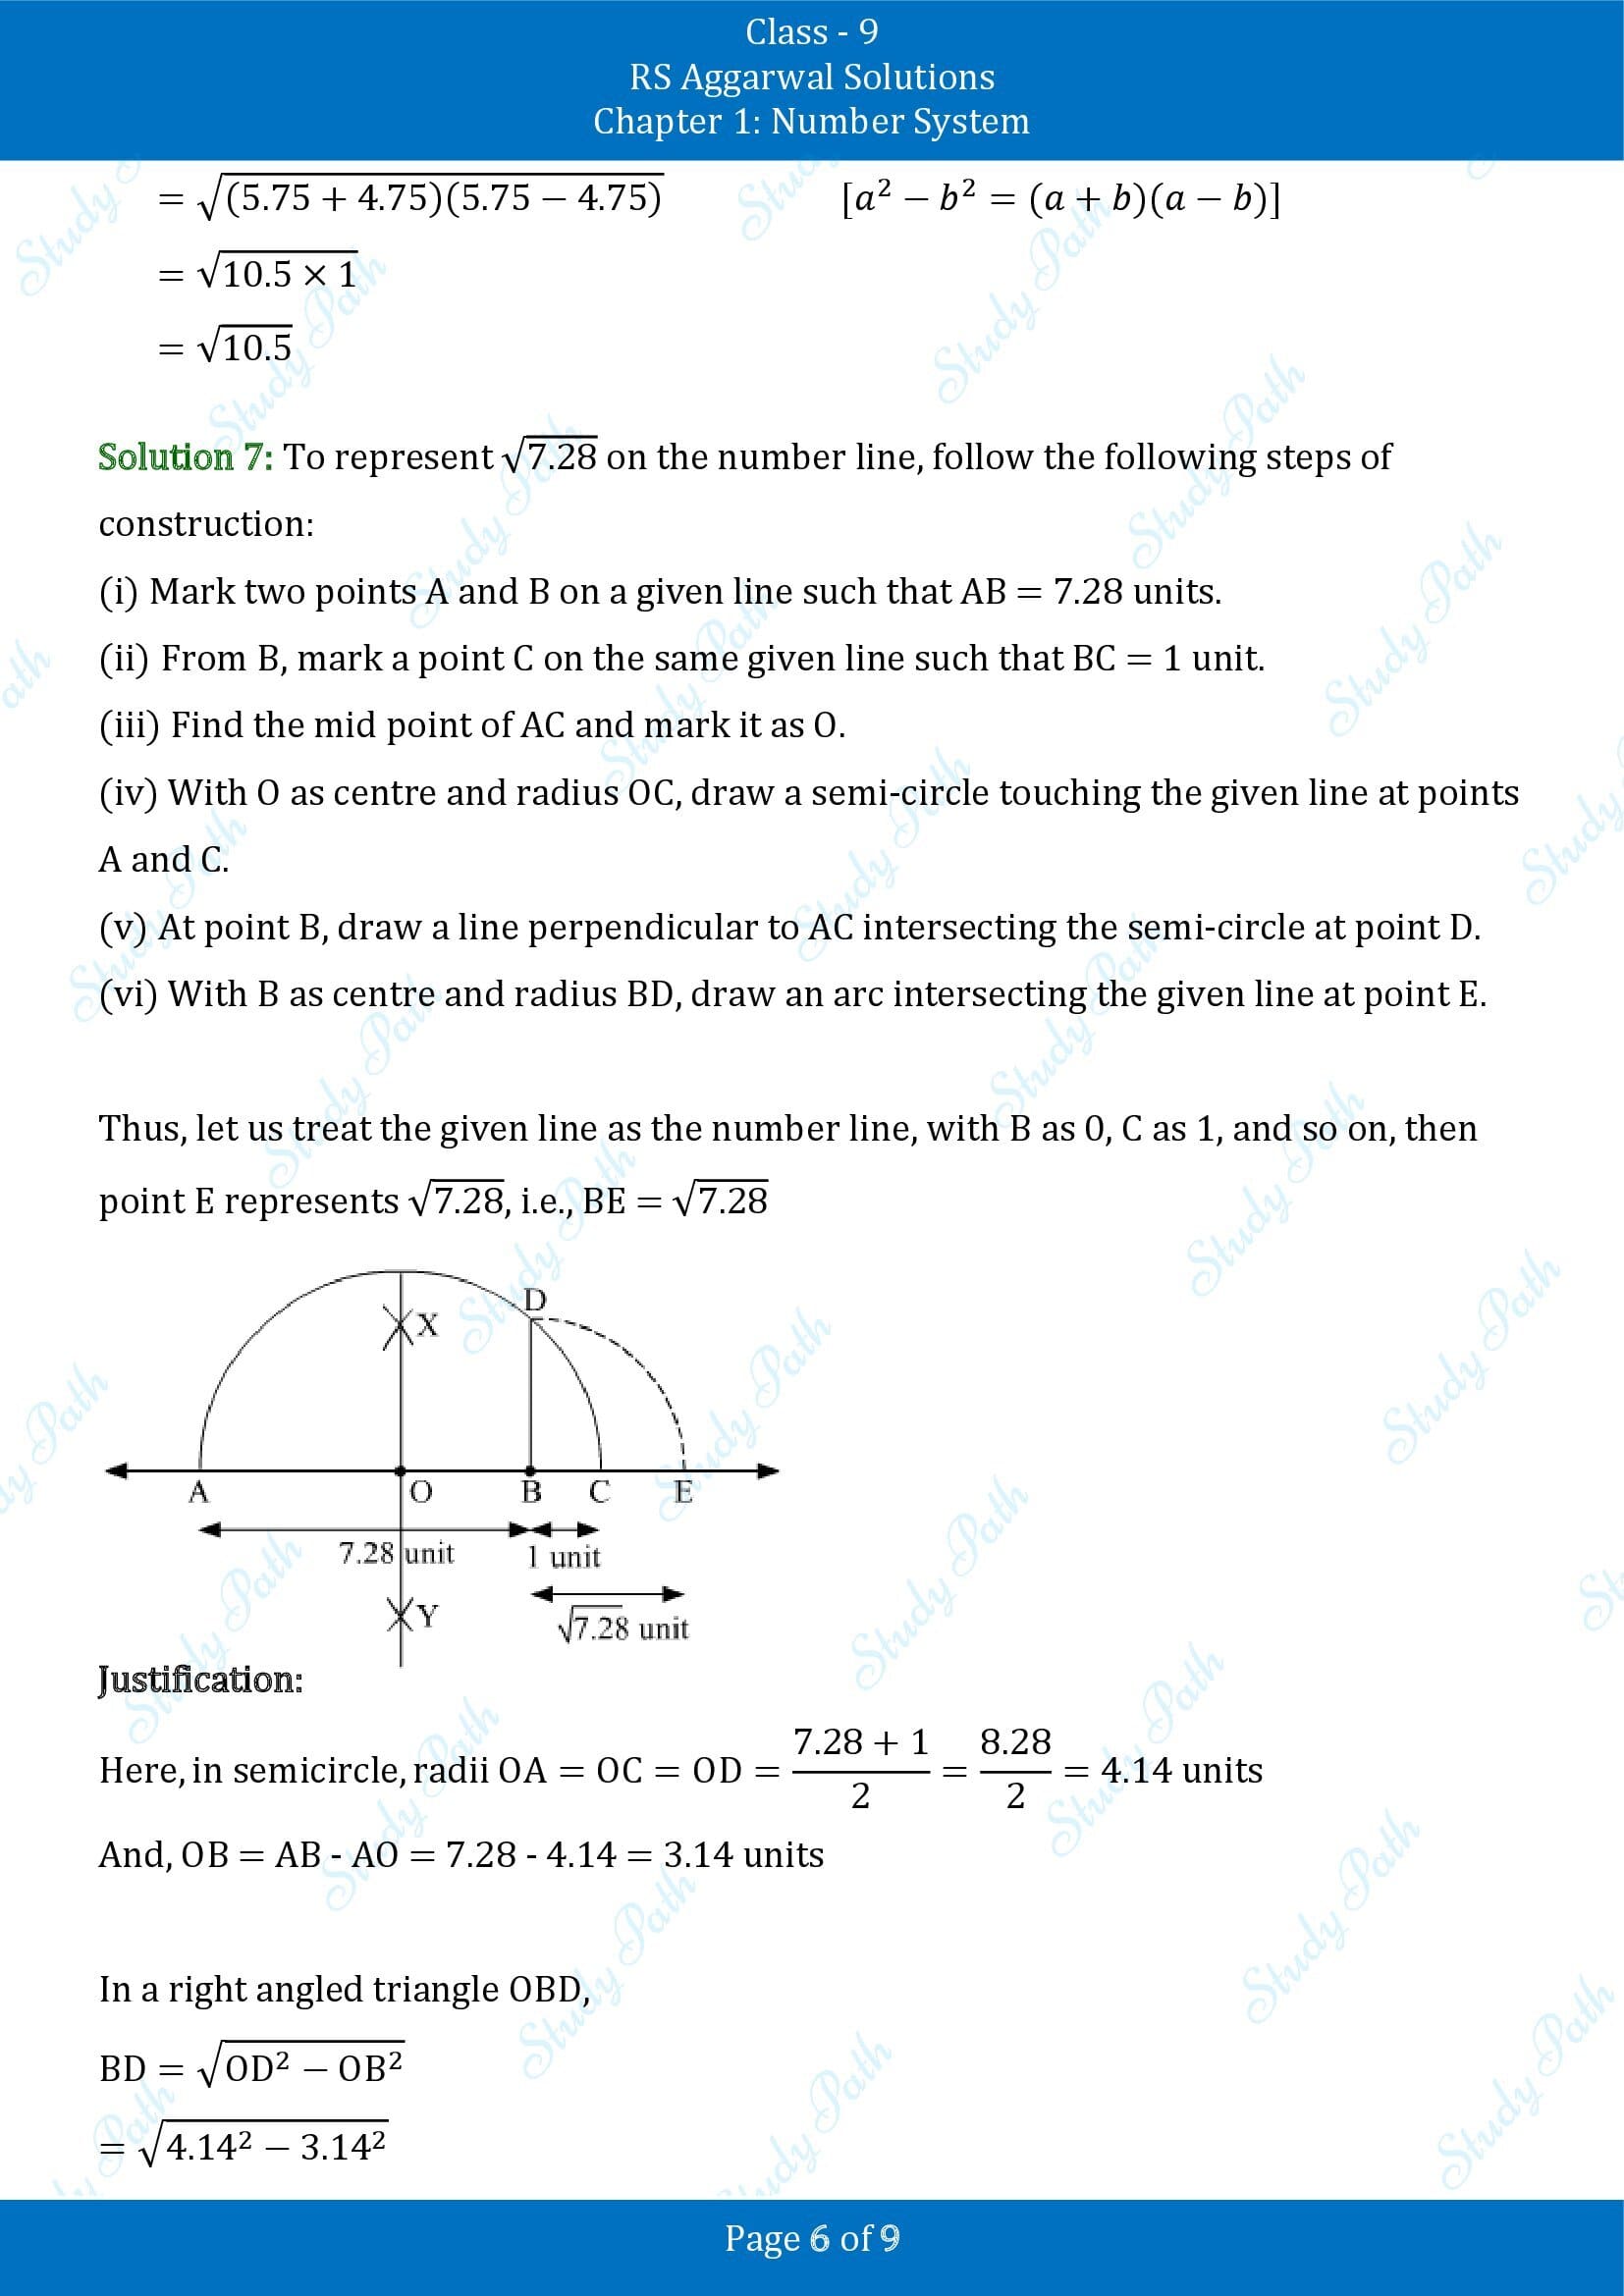 RS Aggarwal Solutions Class 9 Chapter 1 Number System Exercise 1E 00006